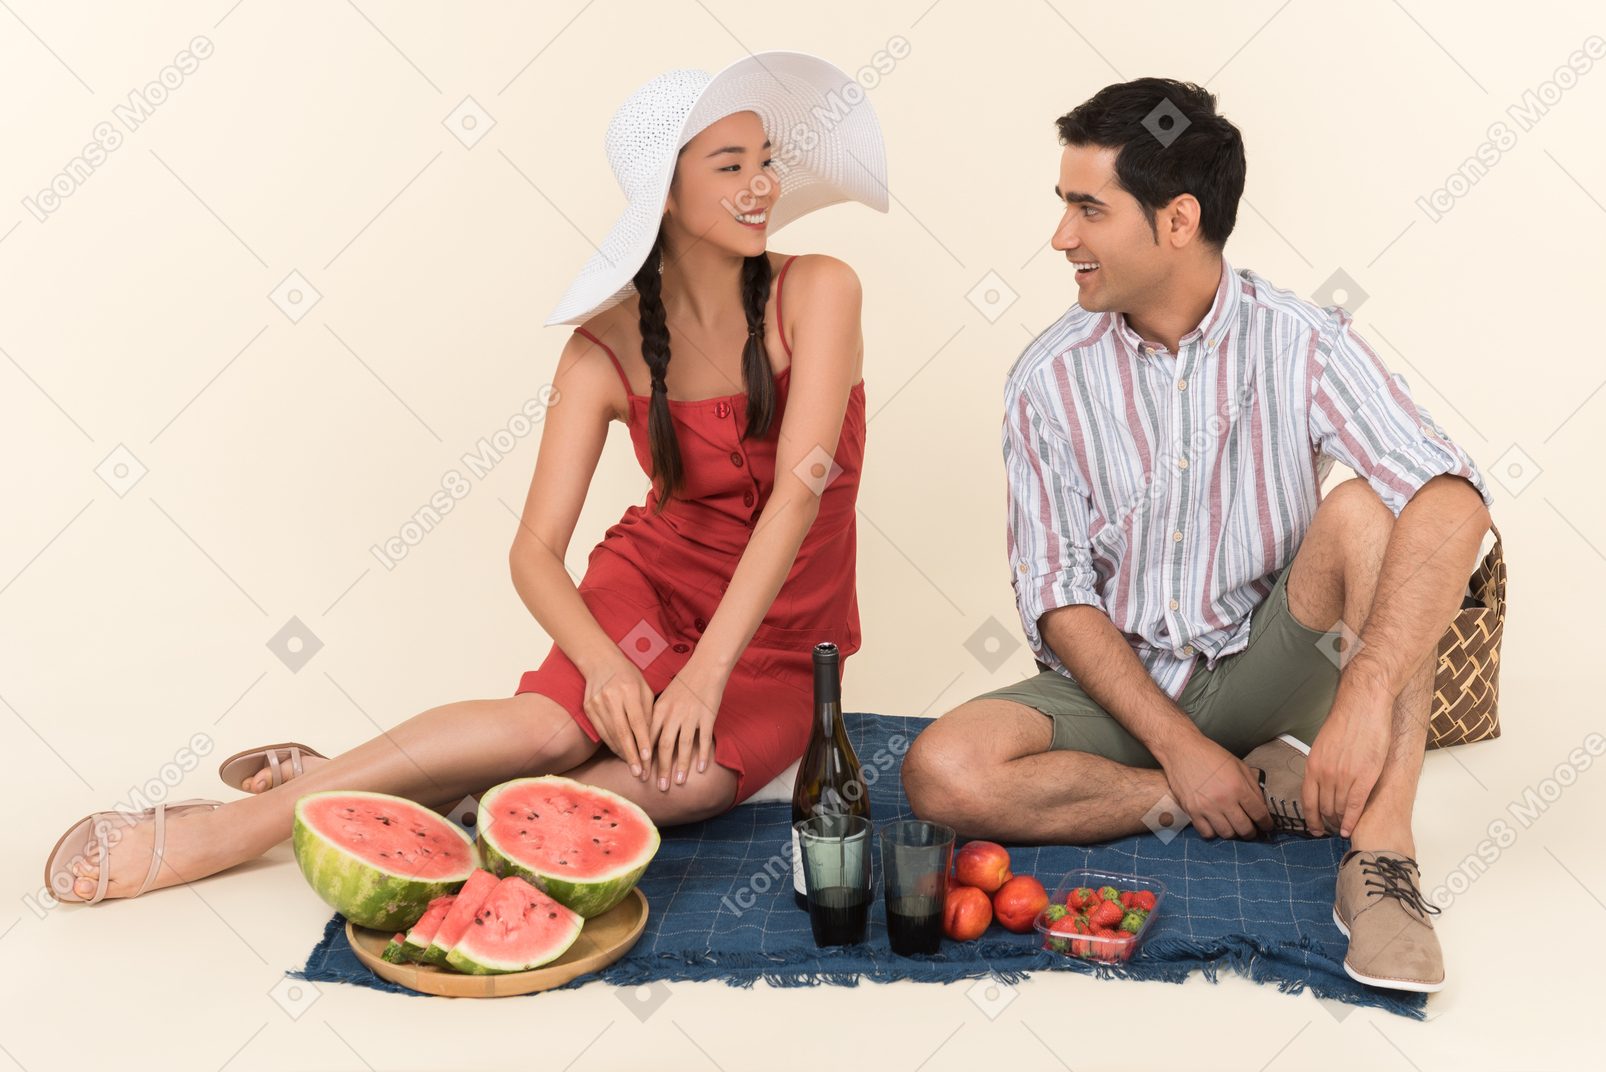 Young interracial couple talking while having picnic